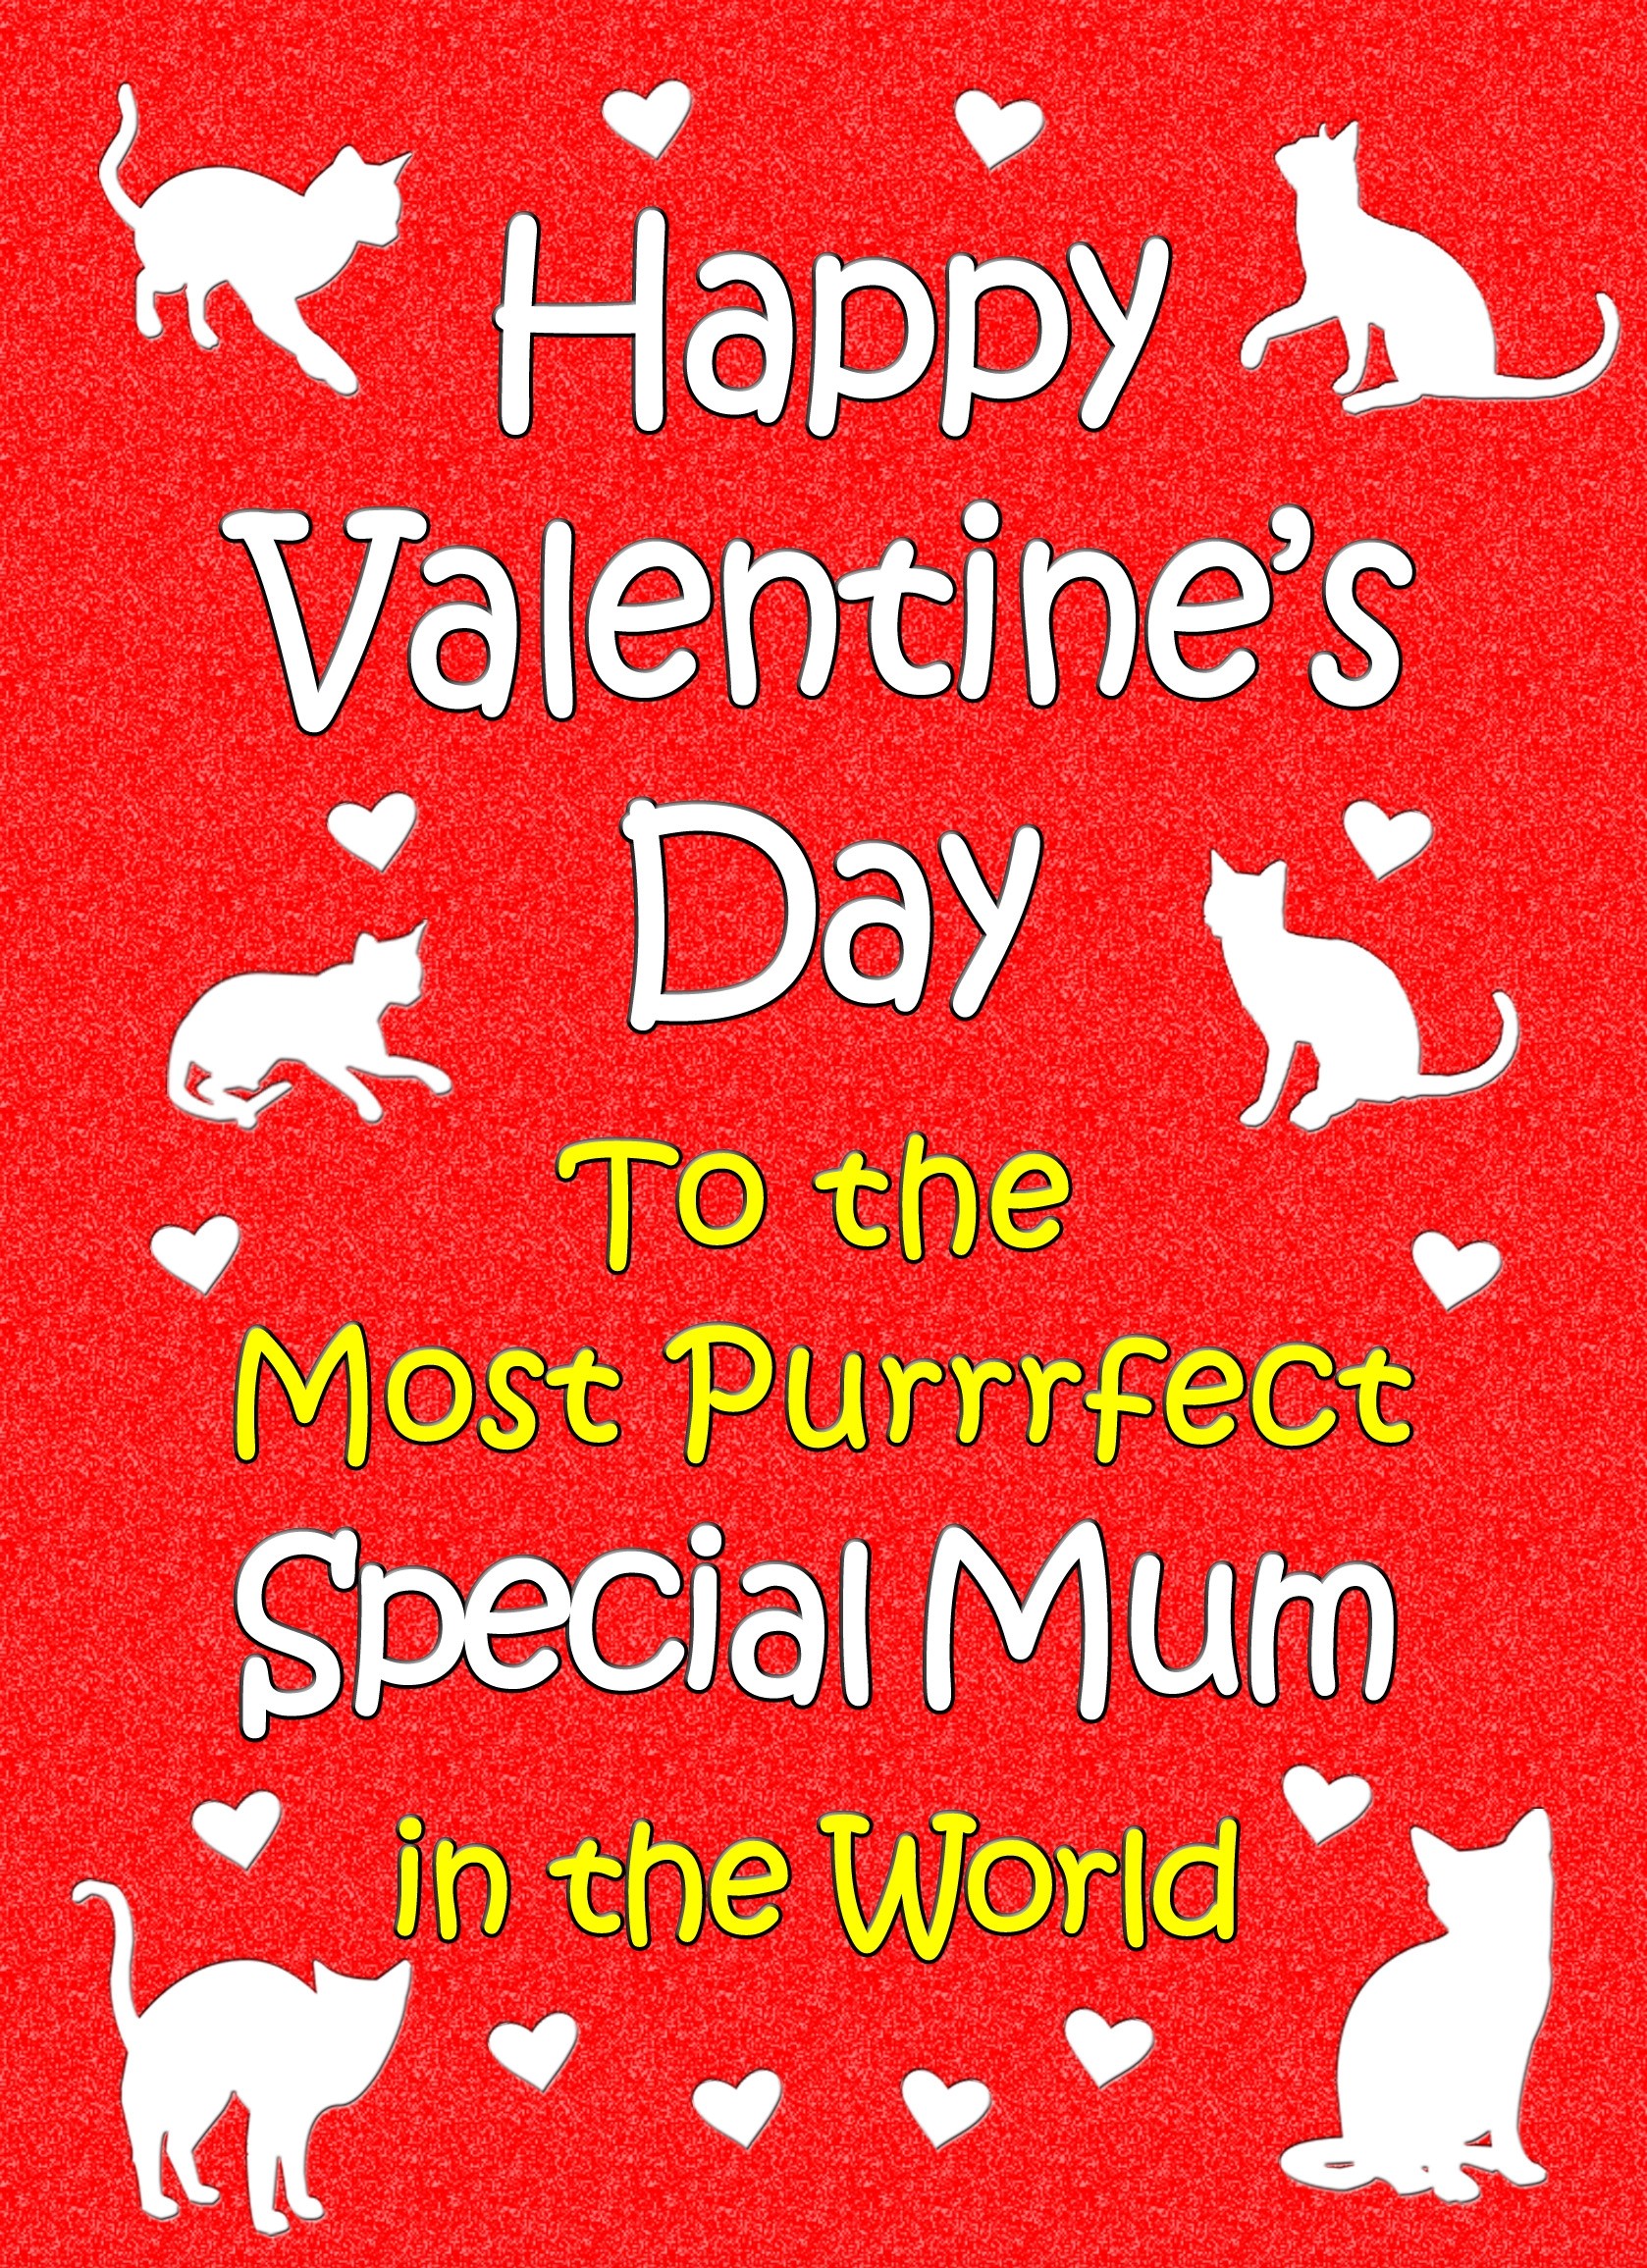 From The Cat Valentines Day Card (Special Mum)